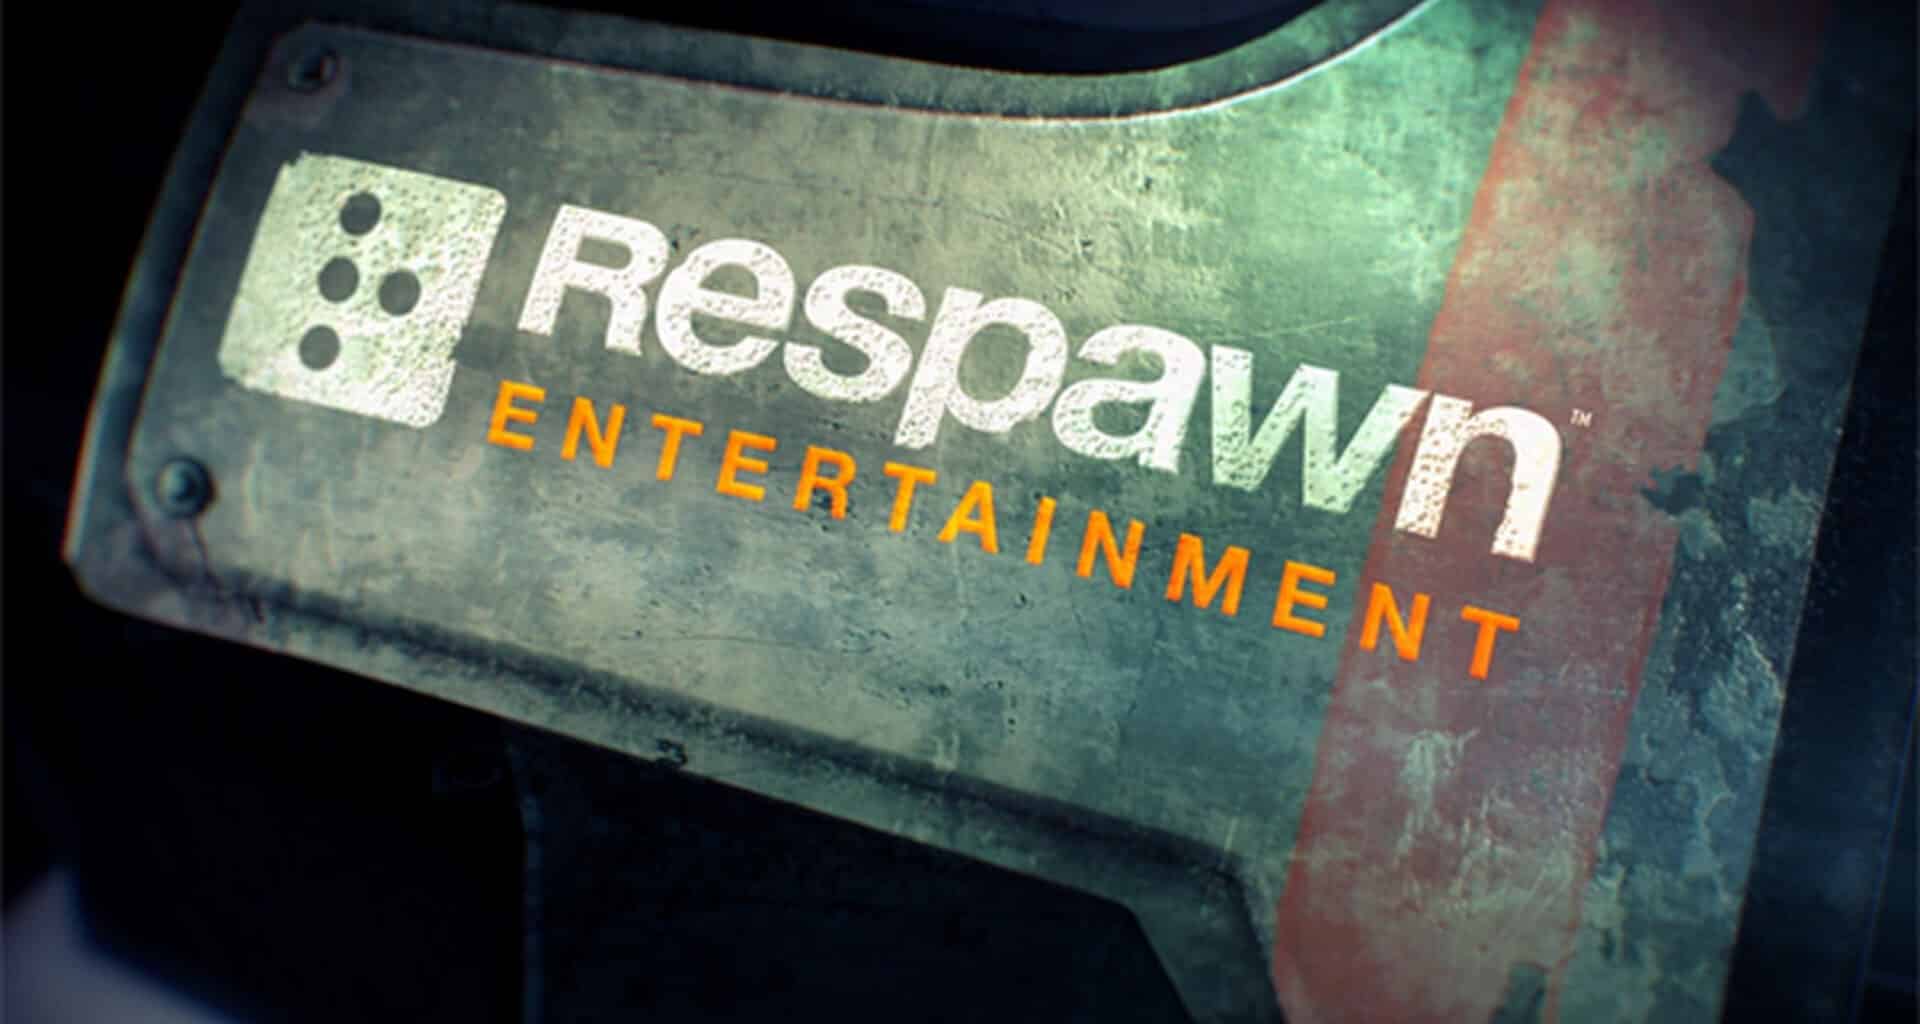 Layoffs Hit Respawn Entertainment as Game Industry Faces Changes